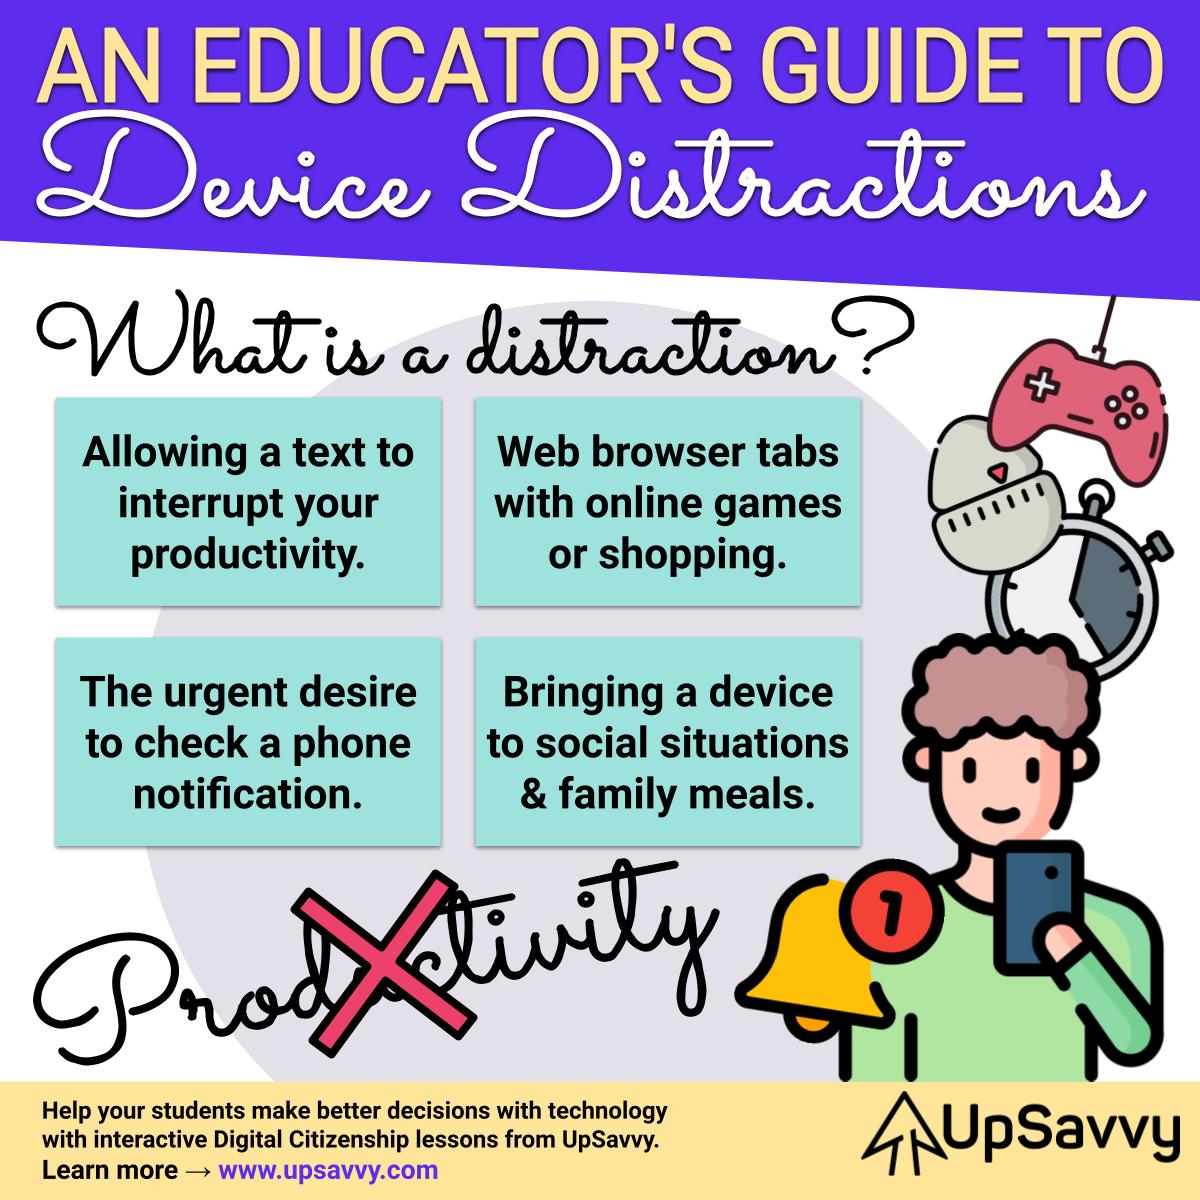 An Educator’s Guide to Device Distractions